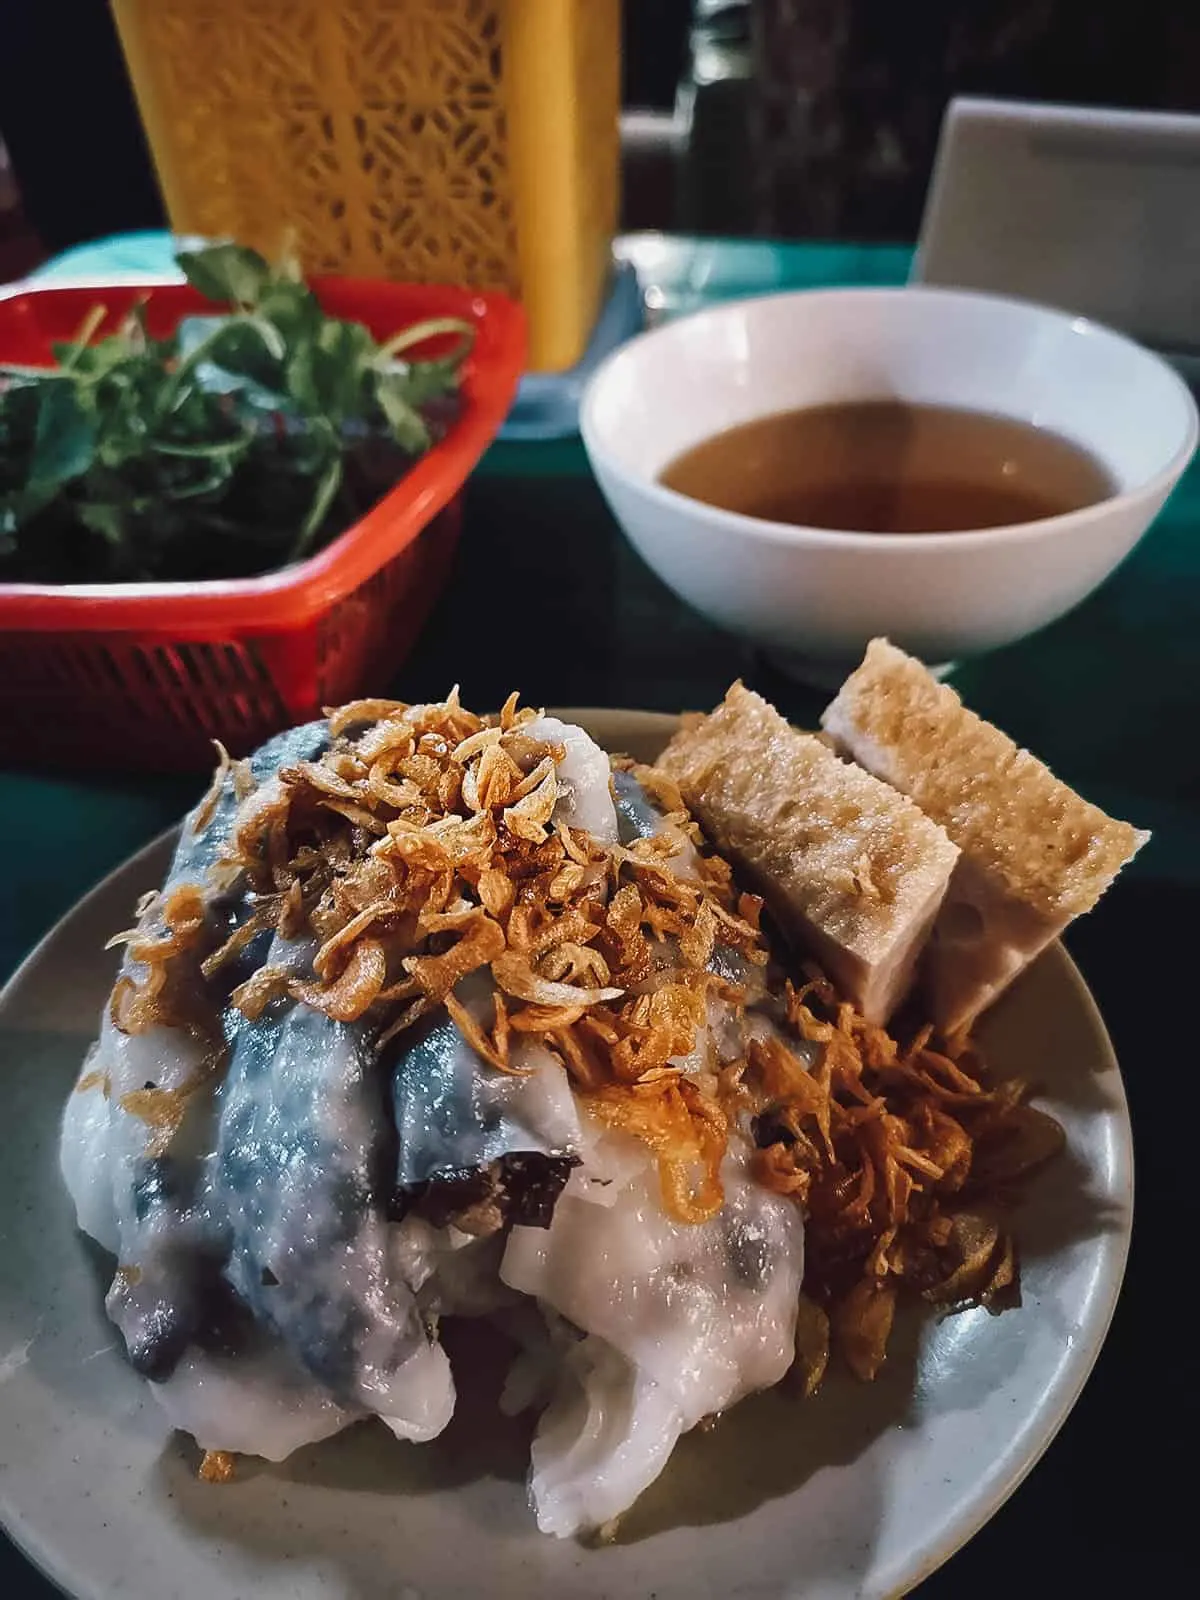 Banh cuon with bean sprouts and fresh herbs, a popular regional Vietnamese noodle dish in Hanoi